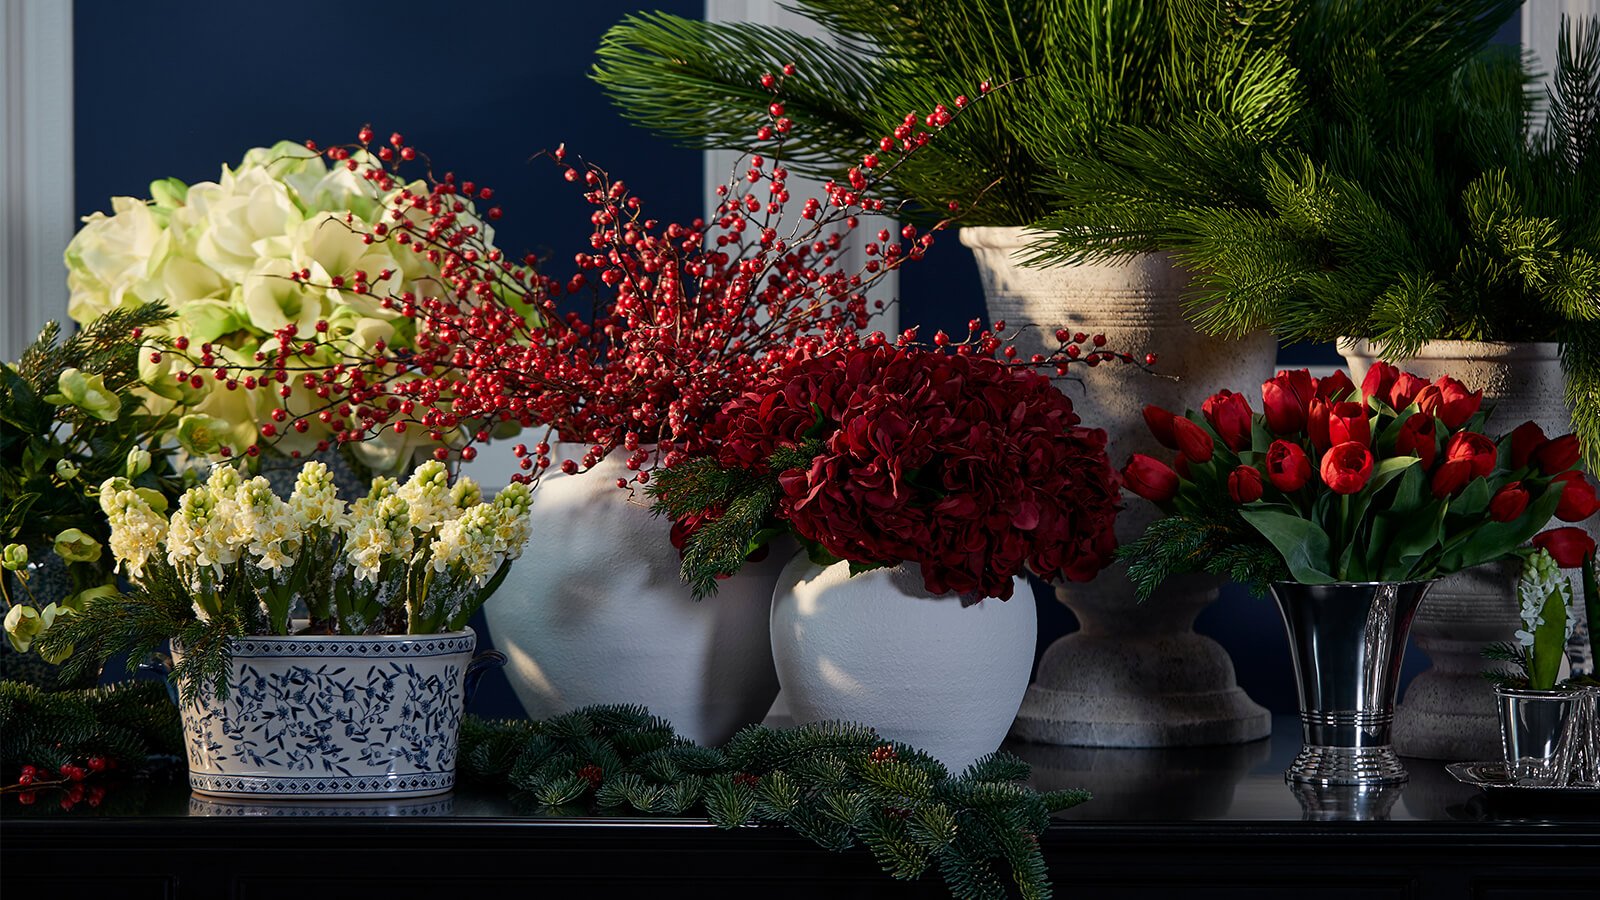 Flowers - Classic artificial Christmas flowers - Newport